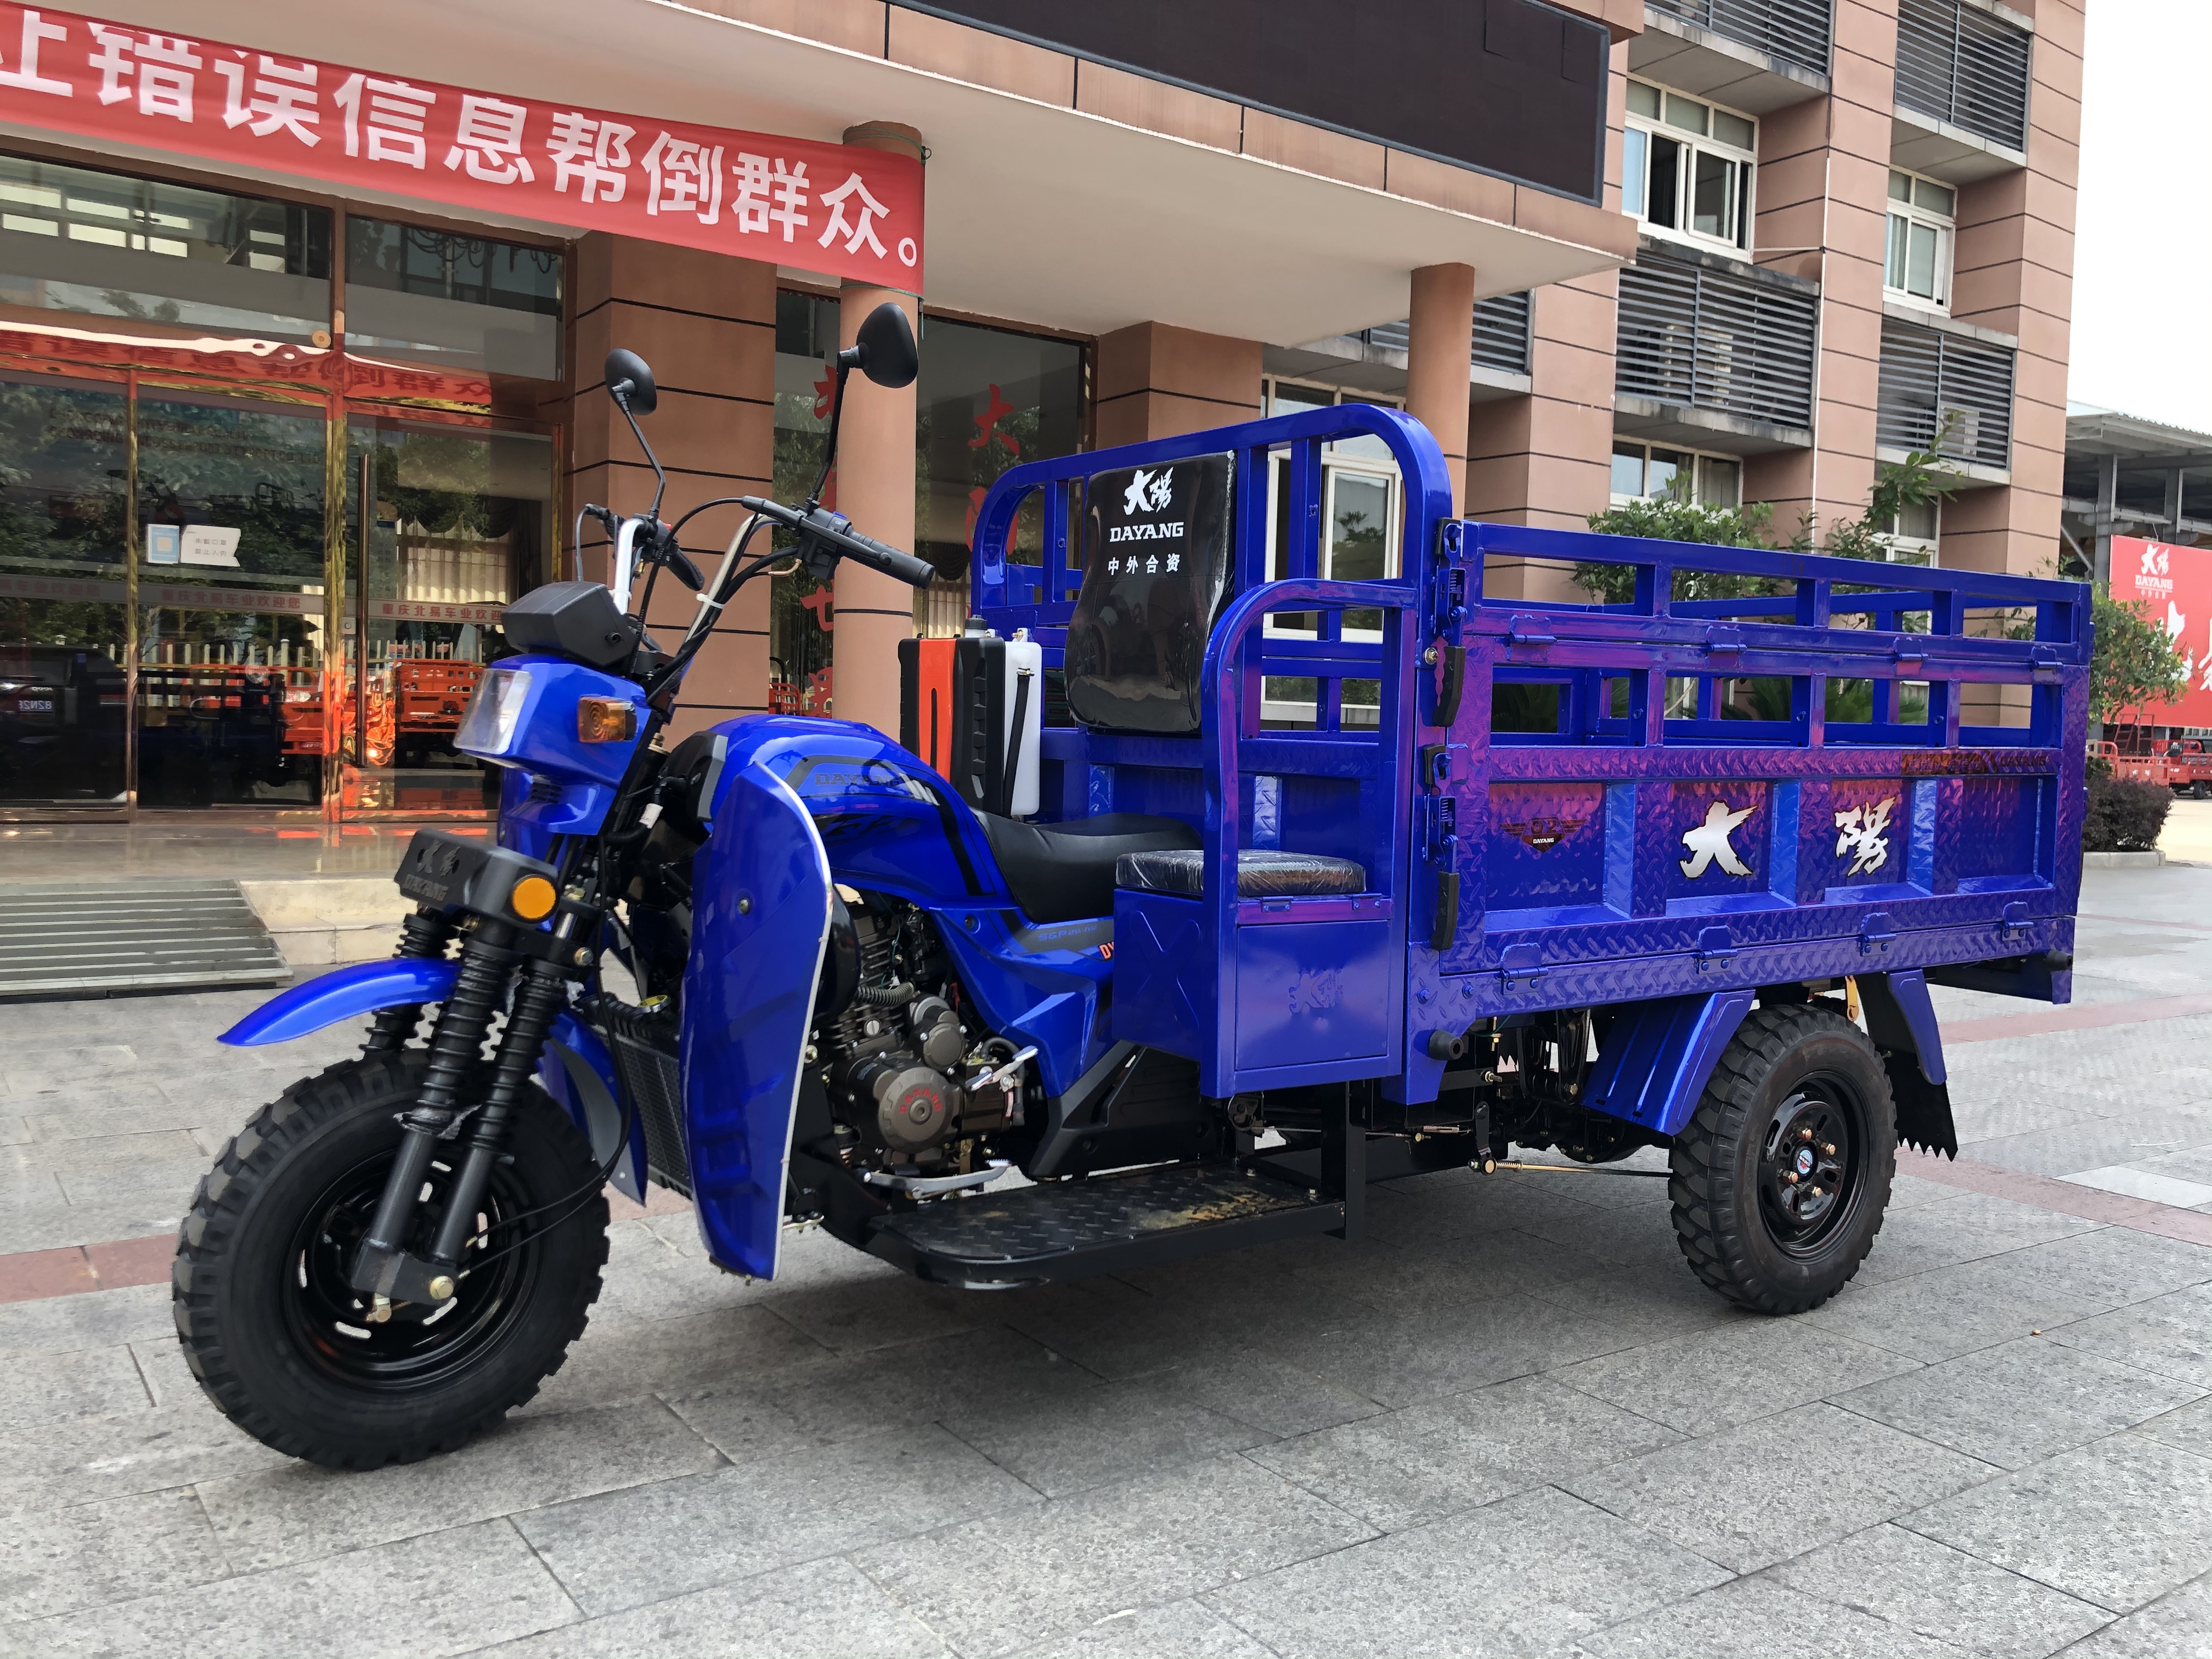 DX-1 Air Cooling Three Wheel Cargo Motorcycle